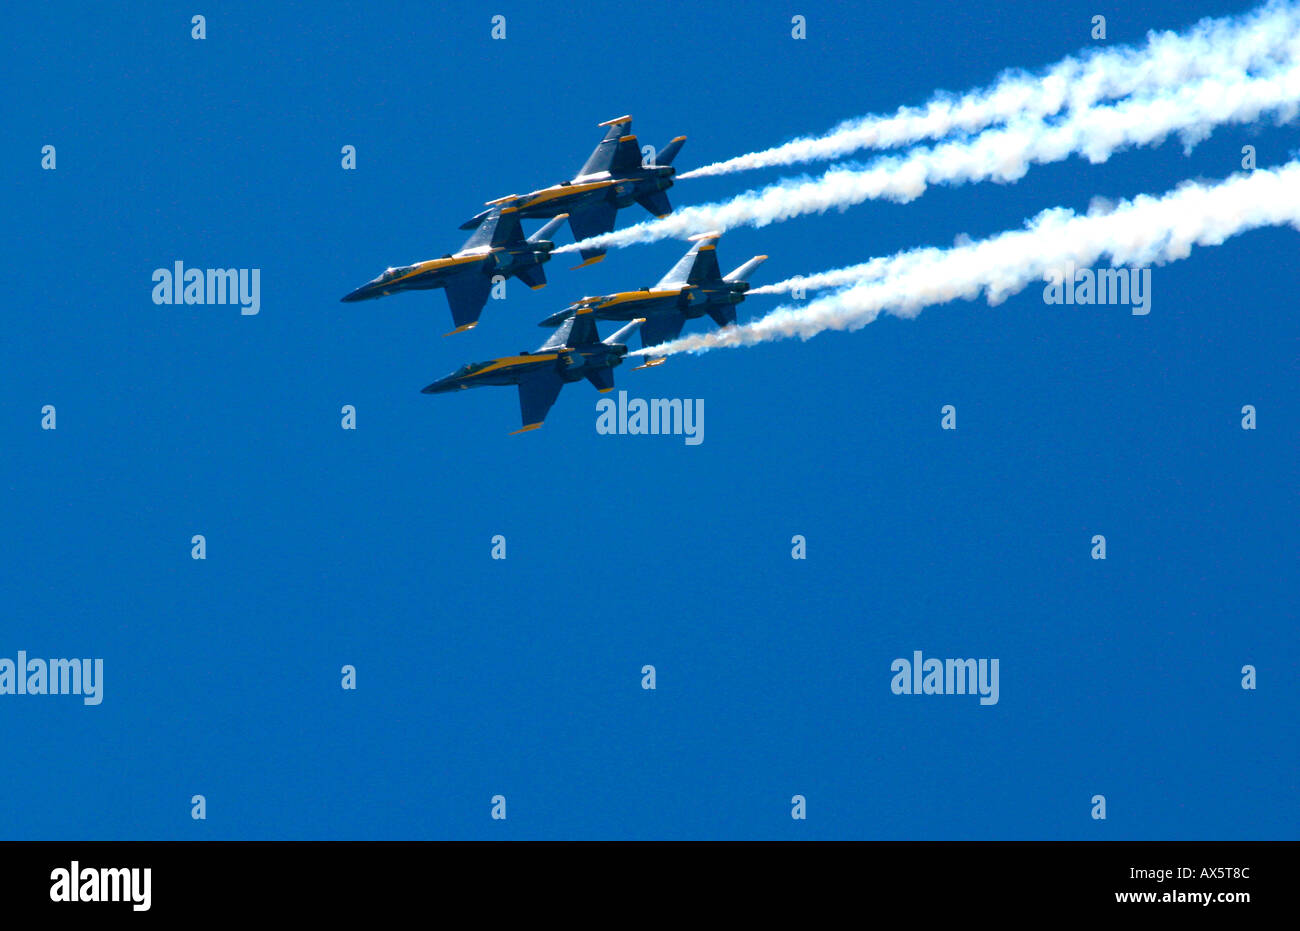 The Blue Angels FA 18s fly in tight formation with trails of white smoke against a clear blue sky Stock Photo